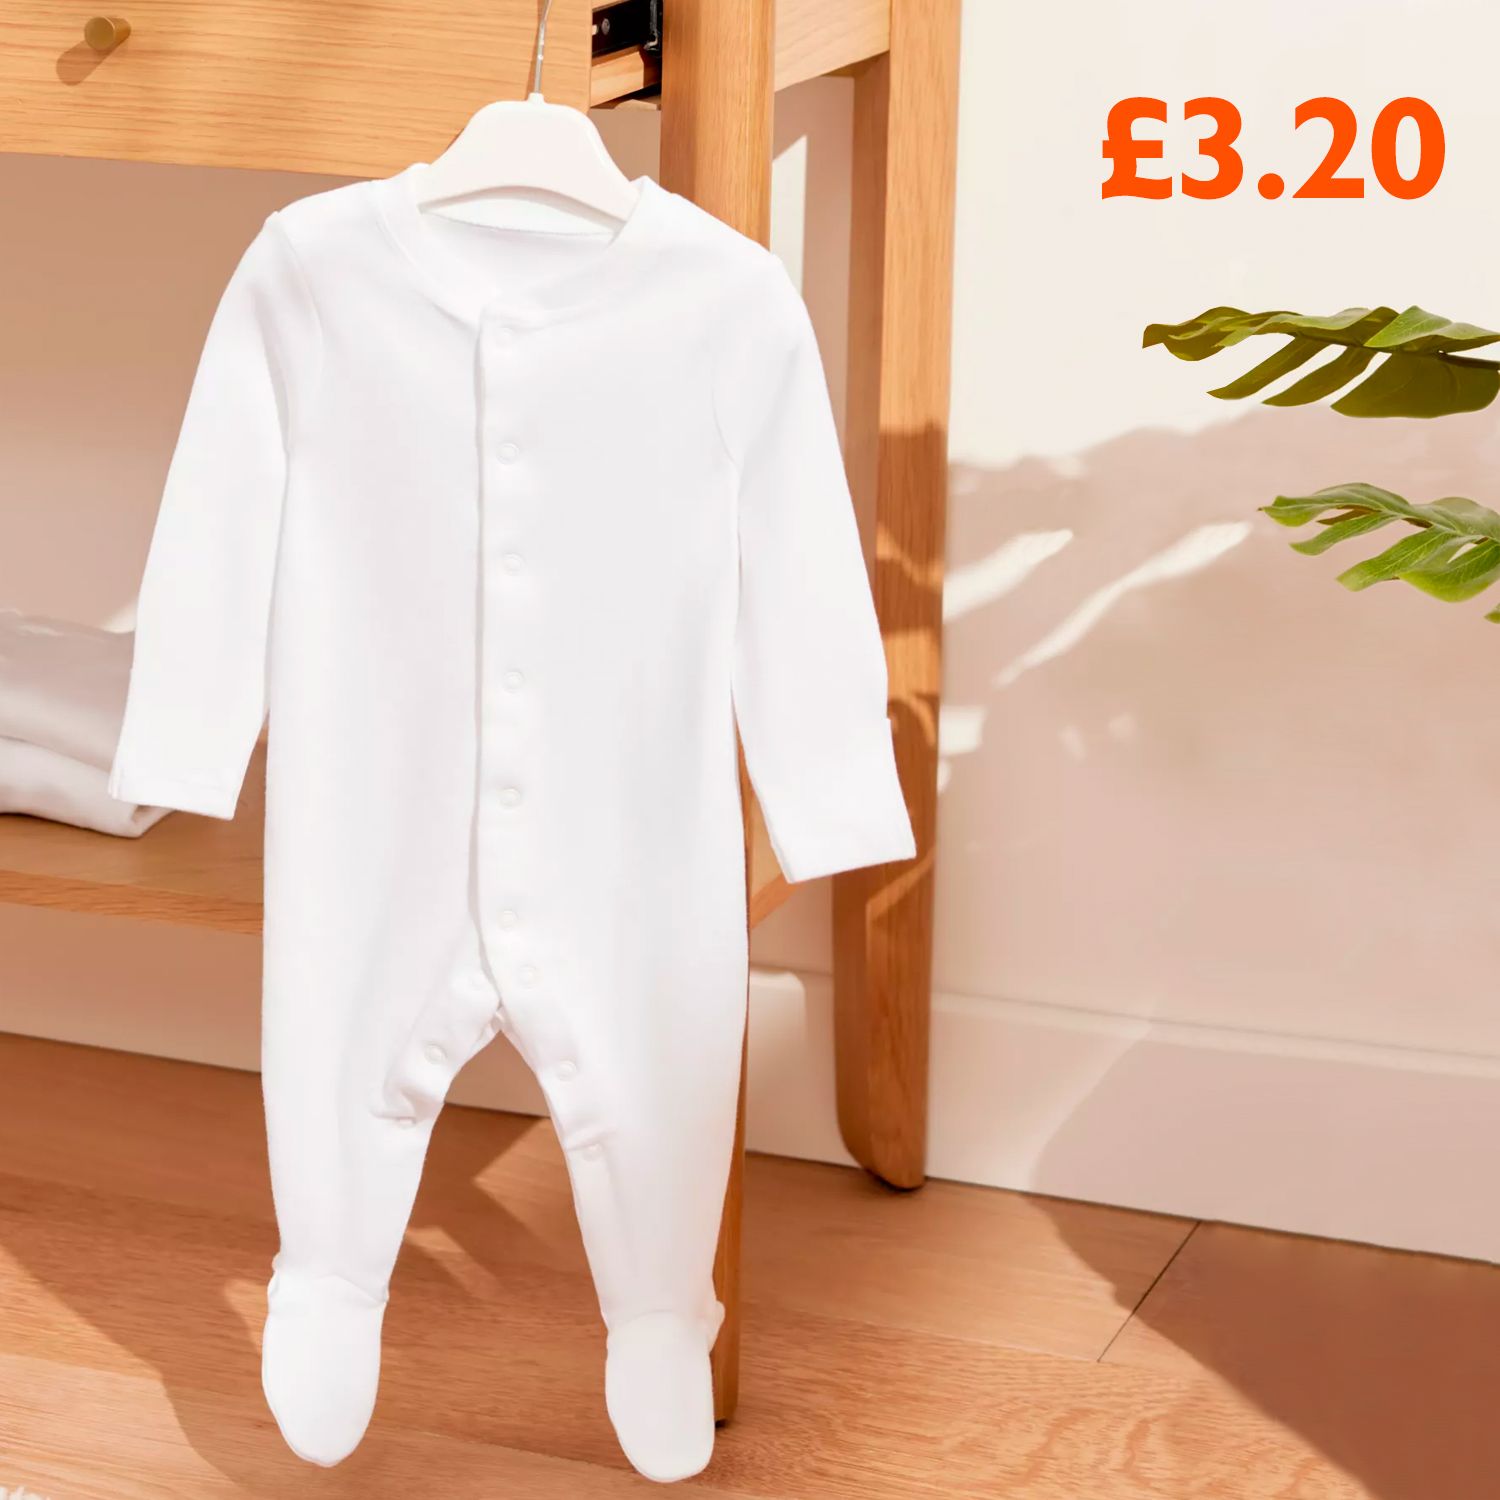 ANYDAY - Sleepsuits from £3.20